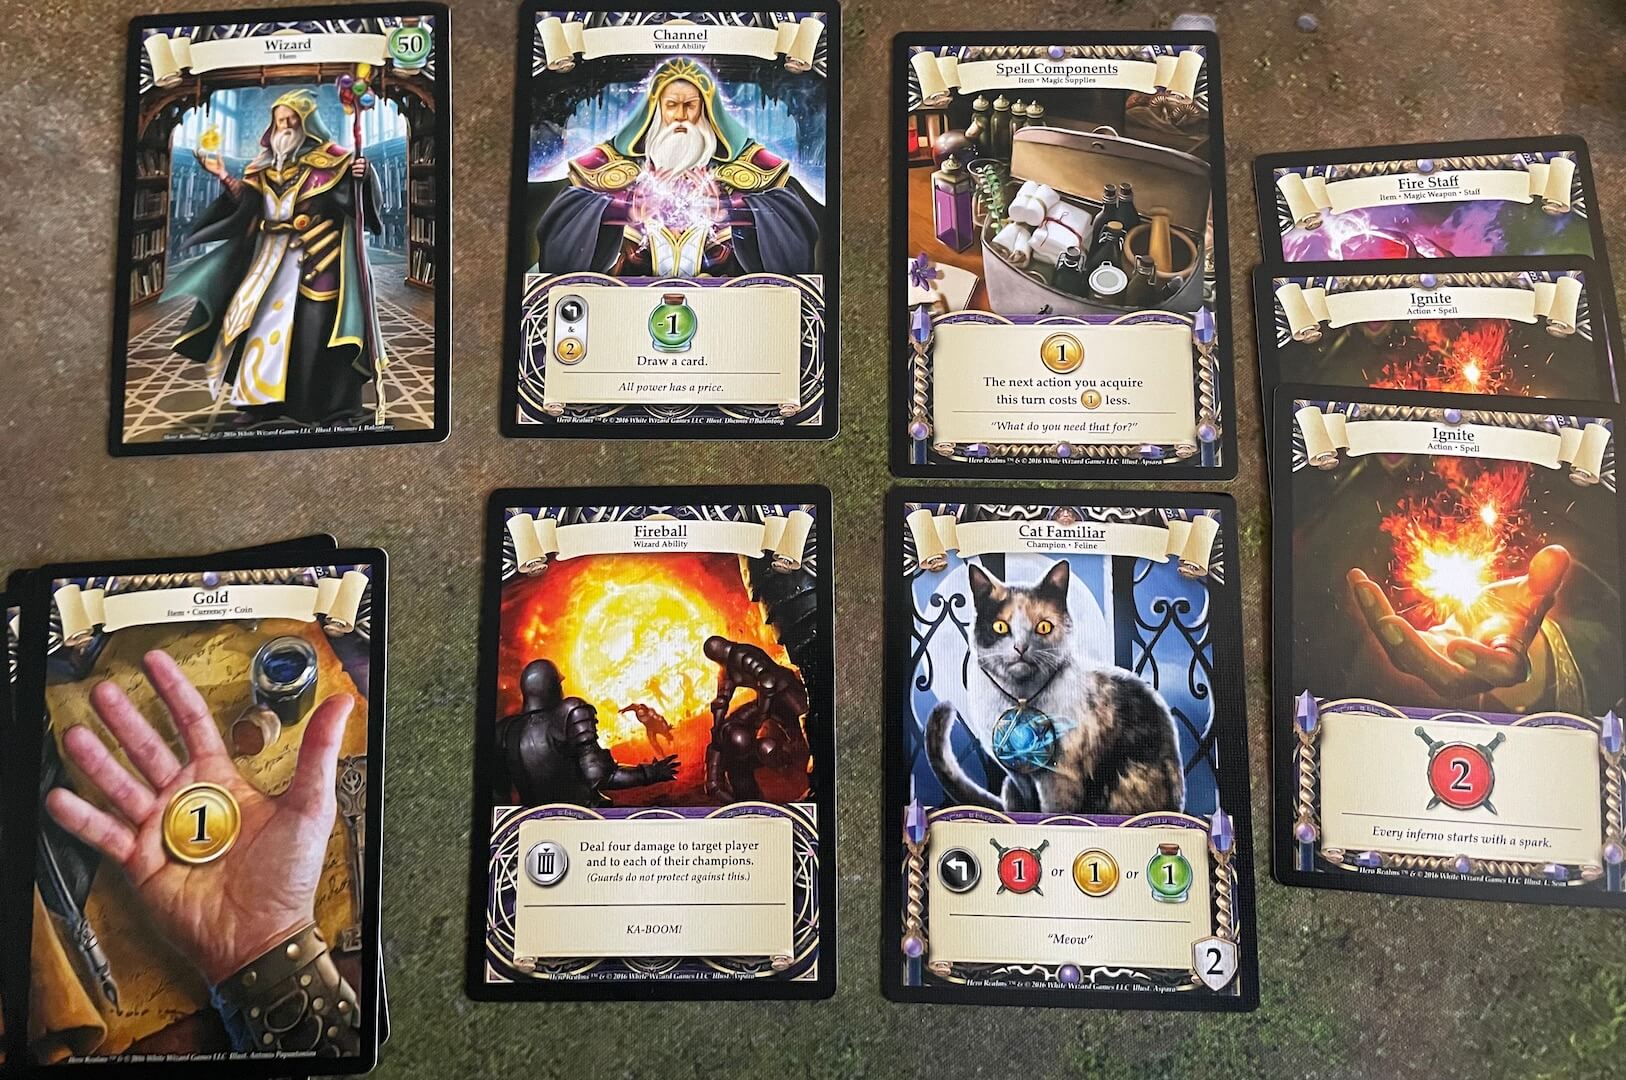 The Wizard character deck for Hero Realms